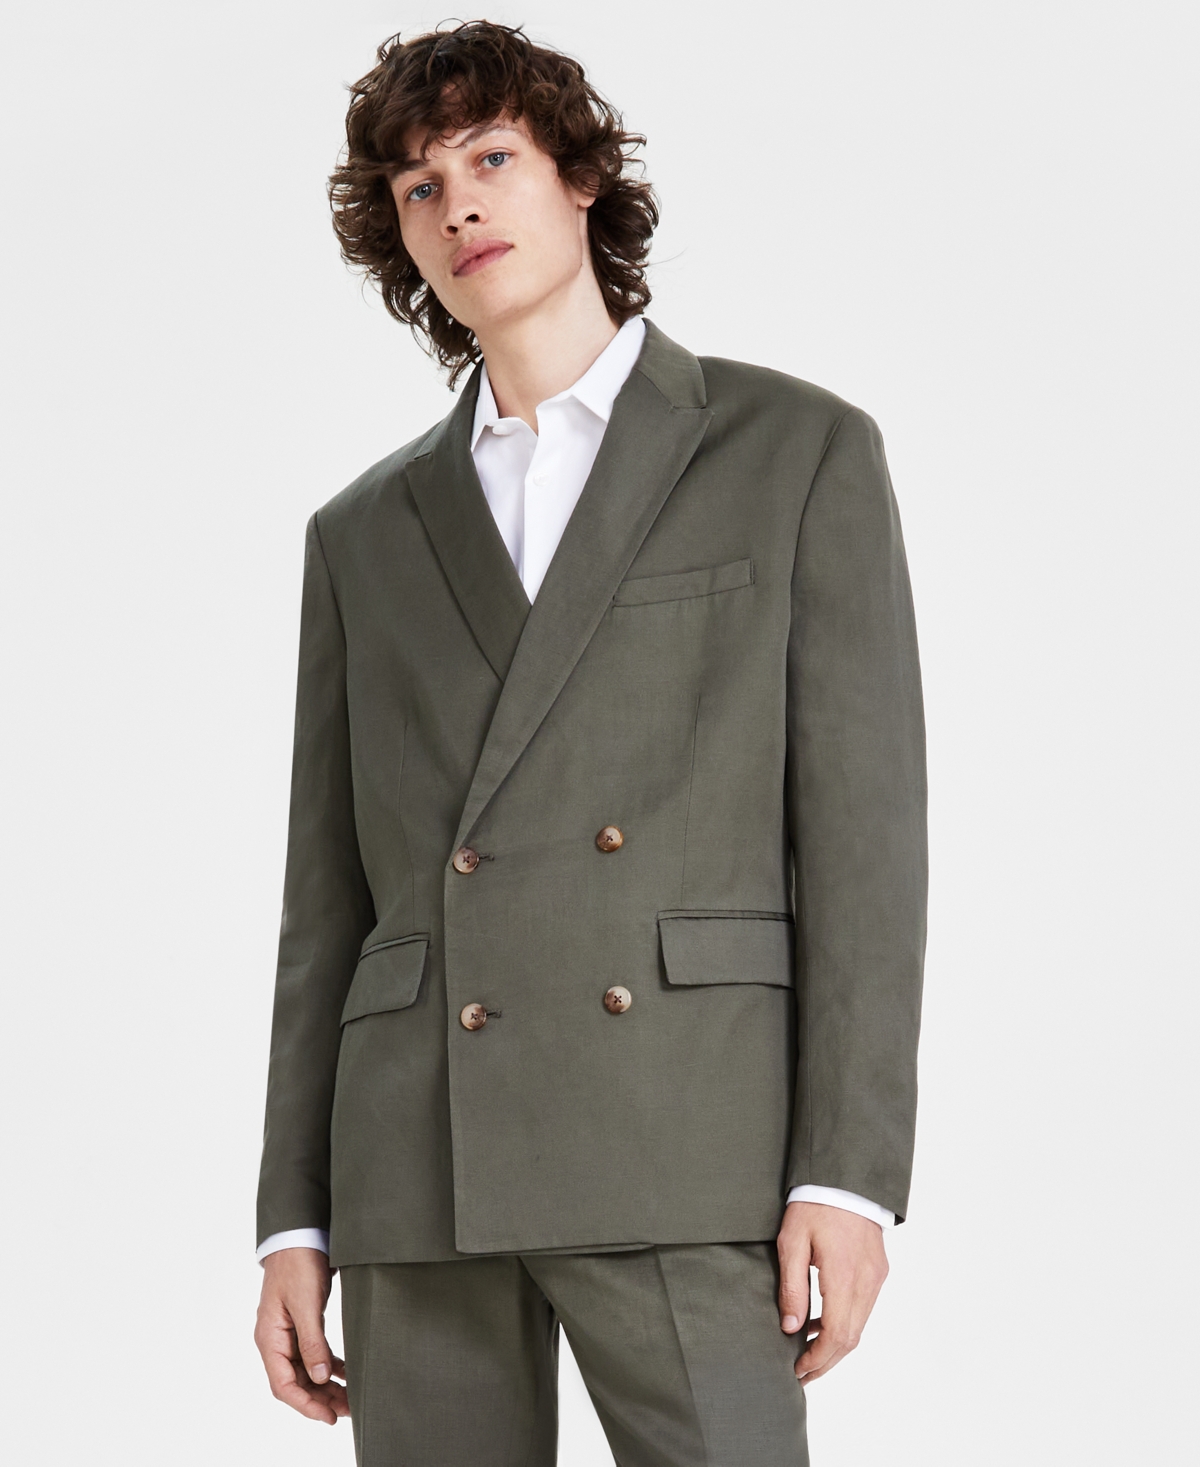 Men's Linen Classic-Fit Solid Double-Breasted Suit Jacket, Created for Macy's - Olive Twist